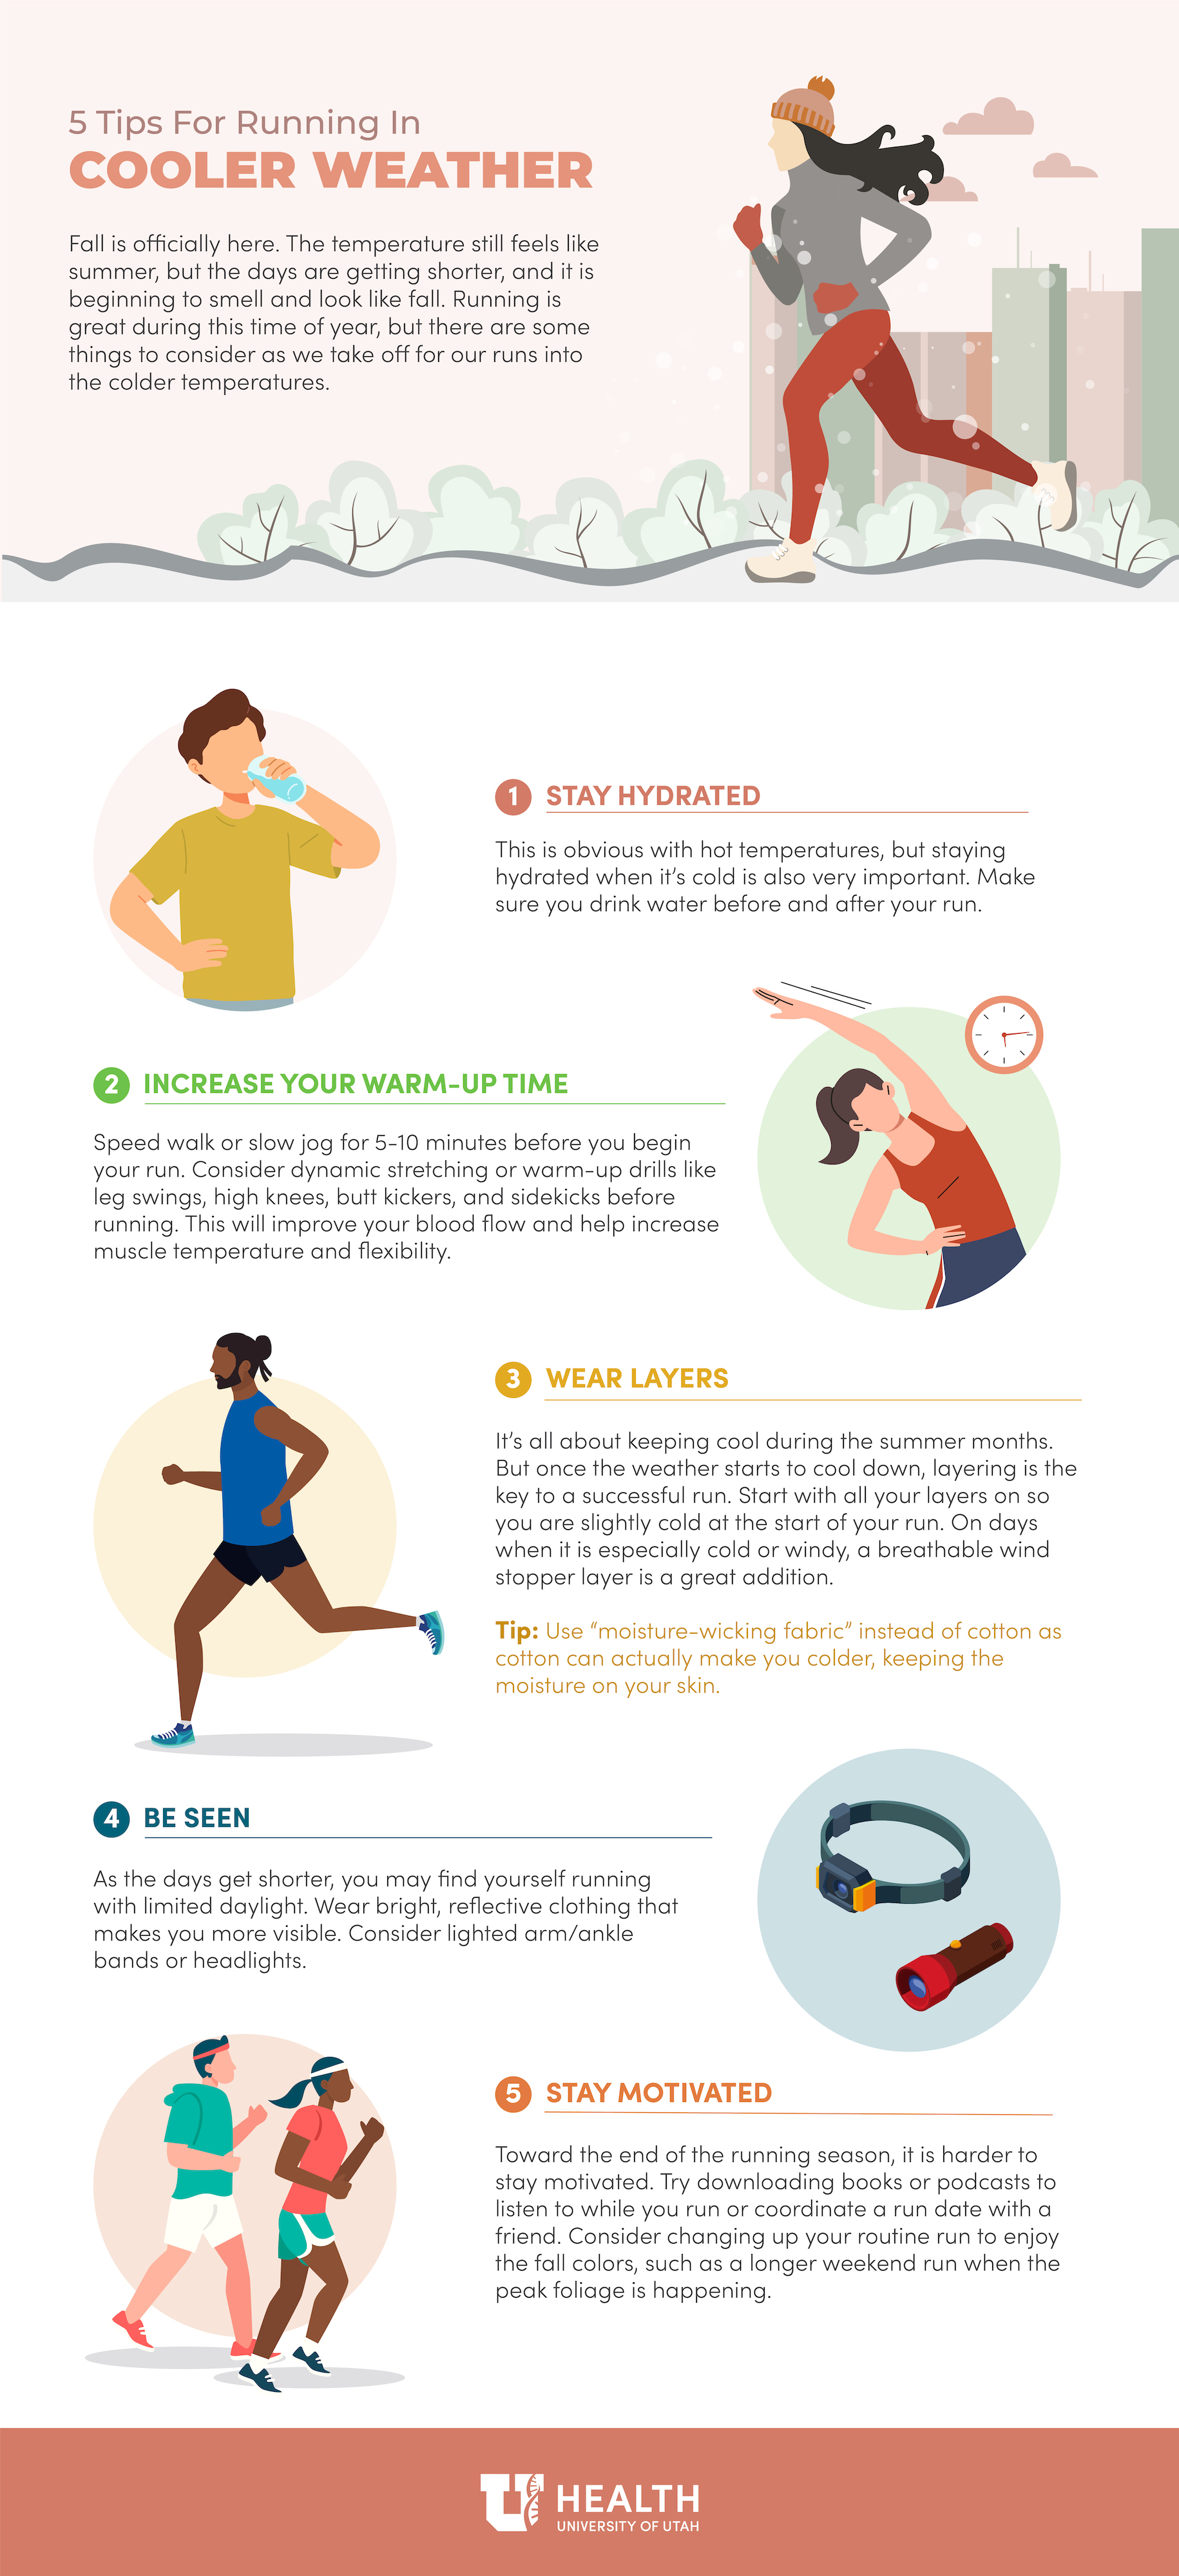 Running in cooler weather infographic